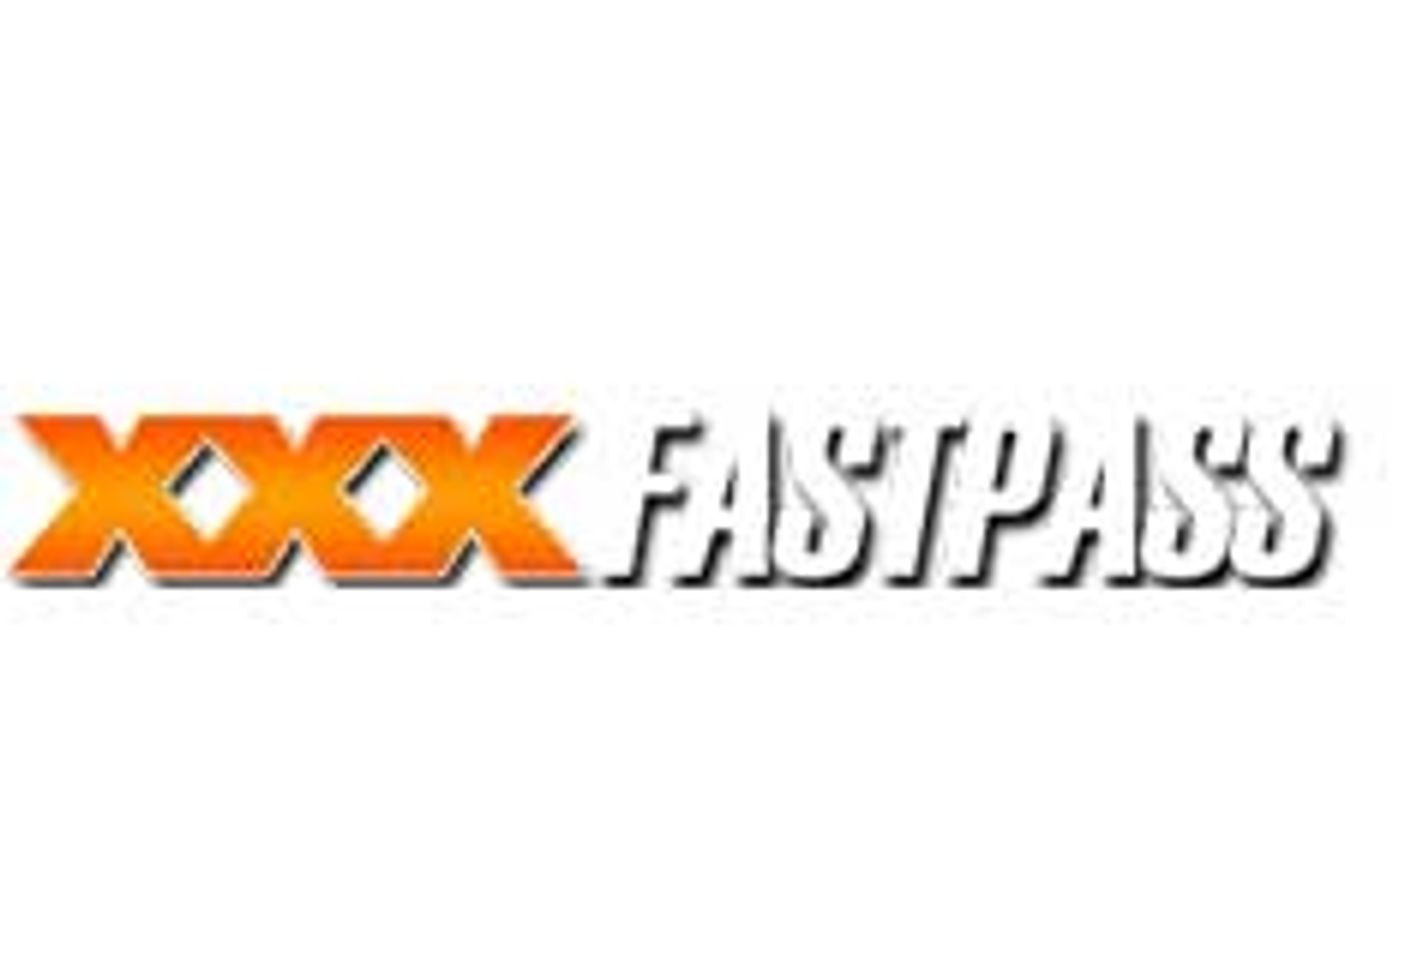 Alexis Amore Launches Website with XxxFastPass Network